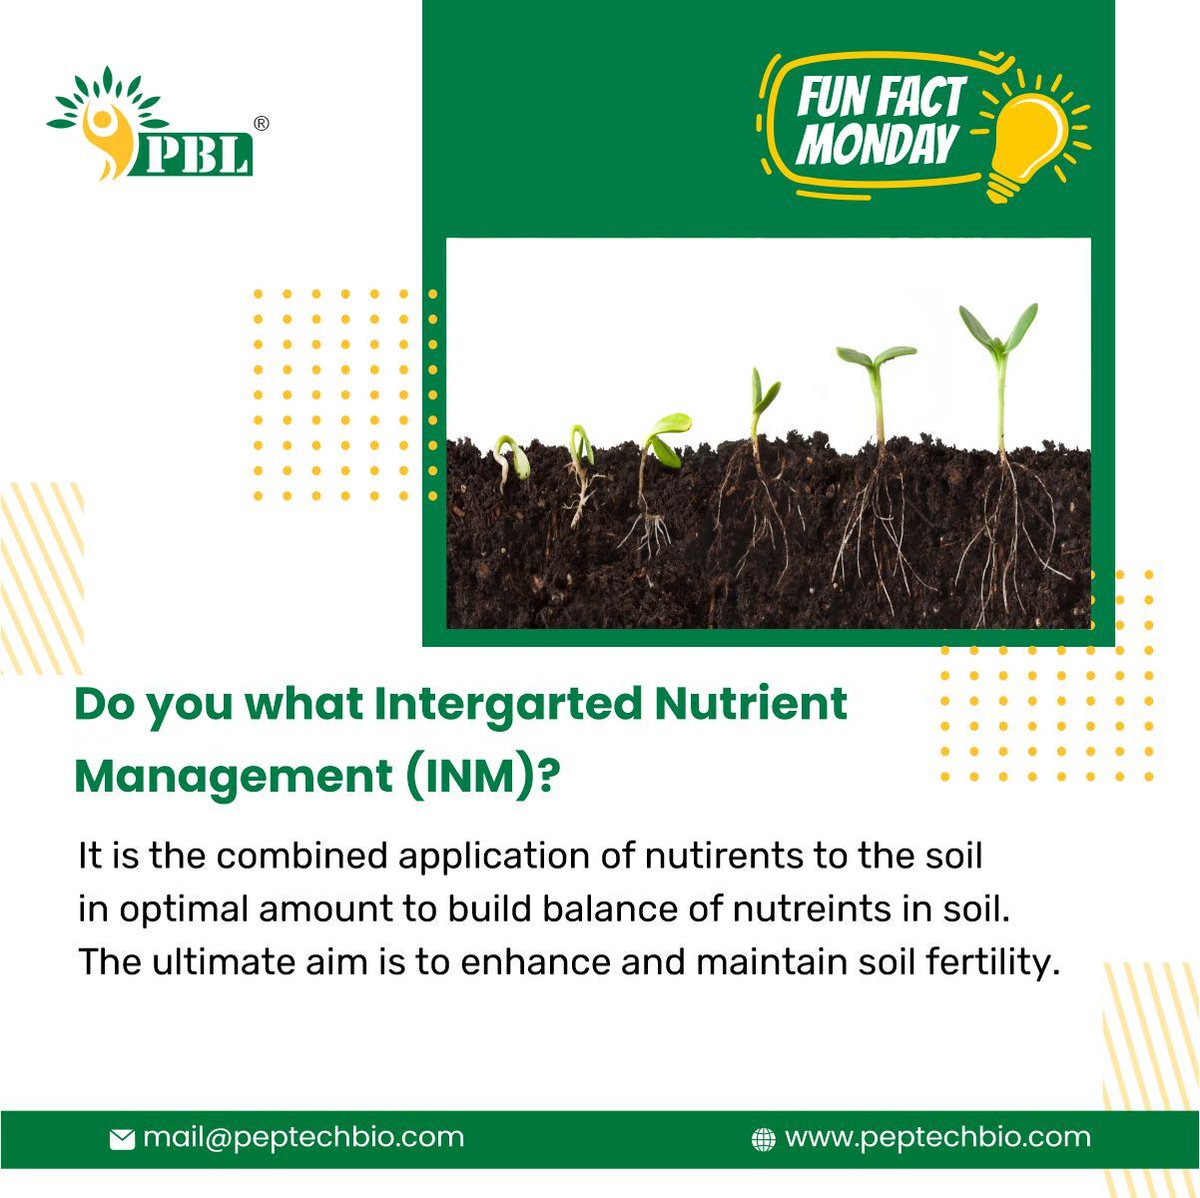 It is necessary to balance the soil nutrient input with the crop requirement. If the nutrients are applied at the right time and in adequate quantities, optimum crop yield is obtained. 
#agriculture #peptech #farming #crops #cropproduction #soil #nutrients #plantnutrients https://t.co/99Gpo0hi2l